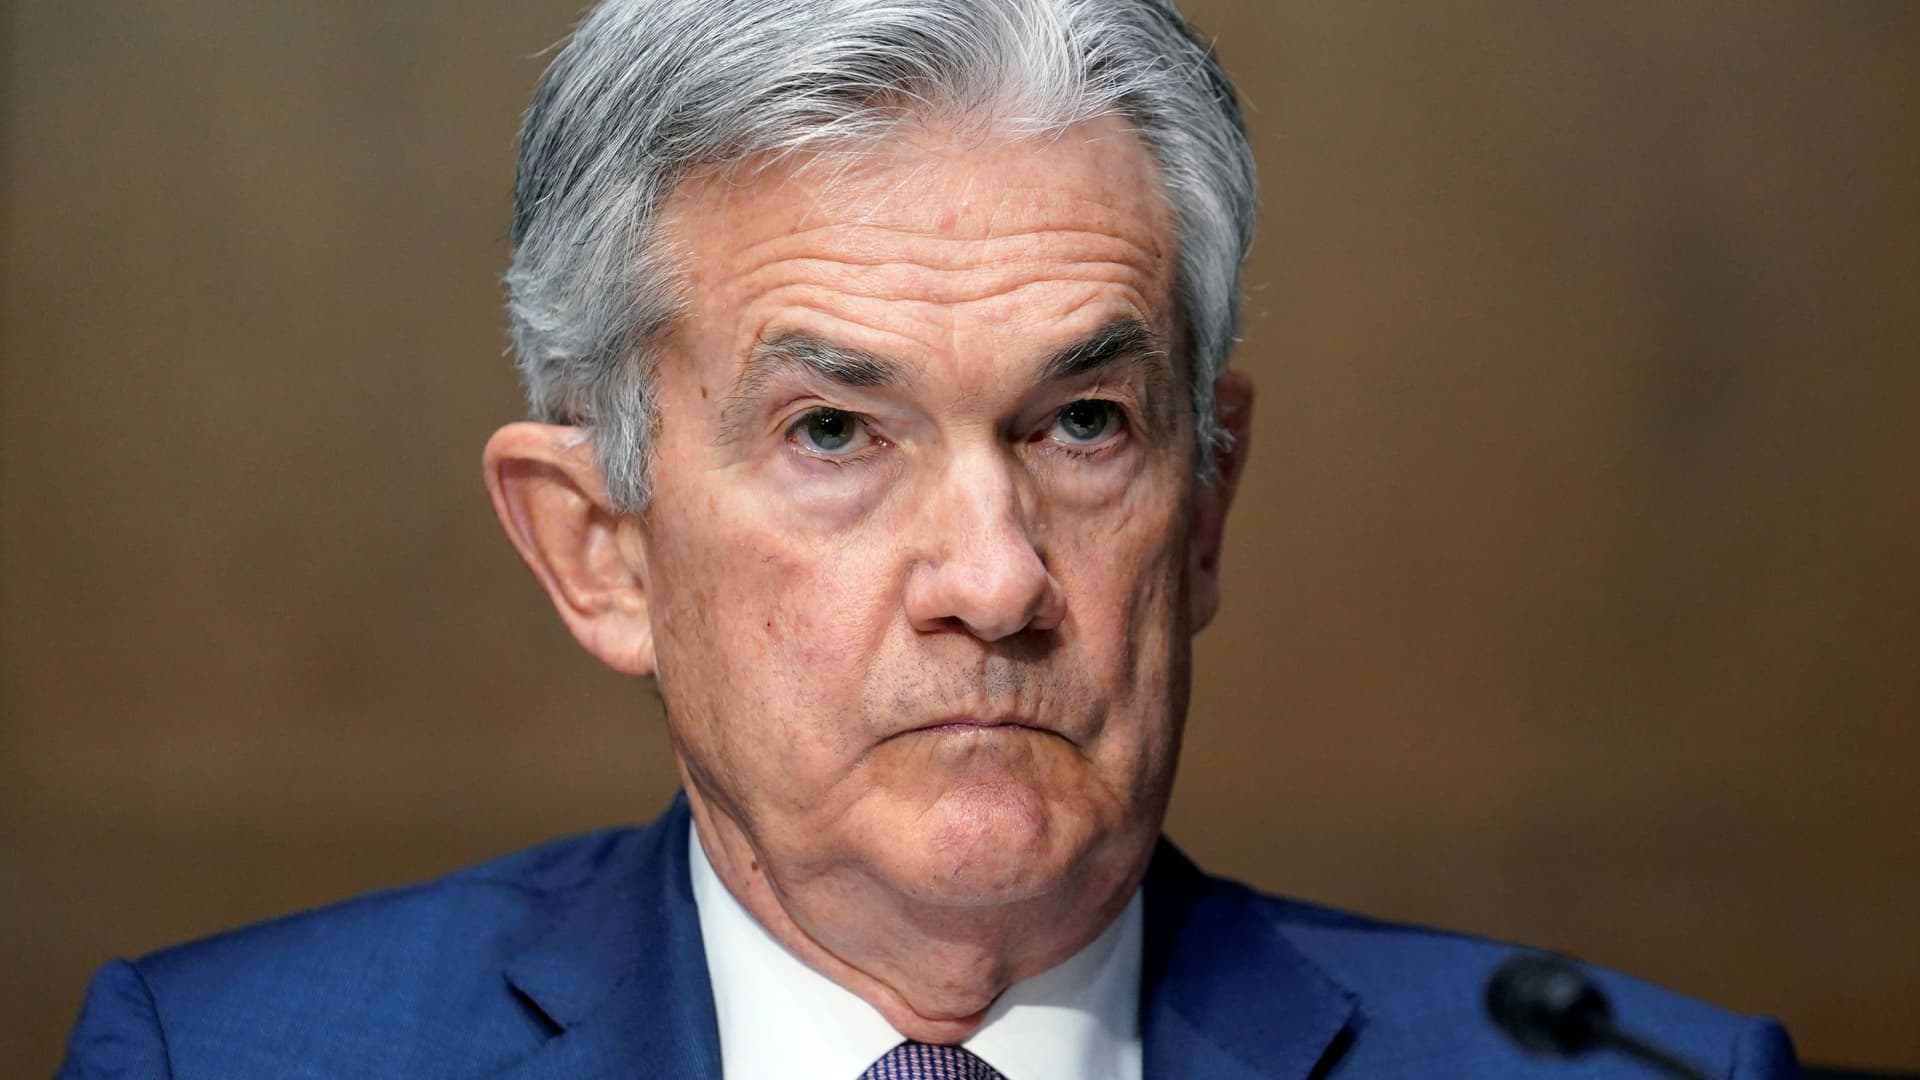 Here's everything the Federal Reserve could do at its policy meeting next week